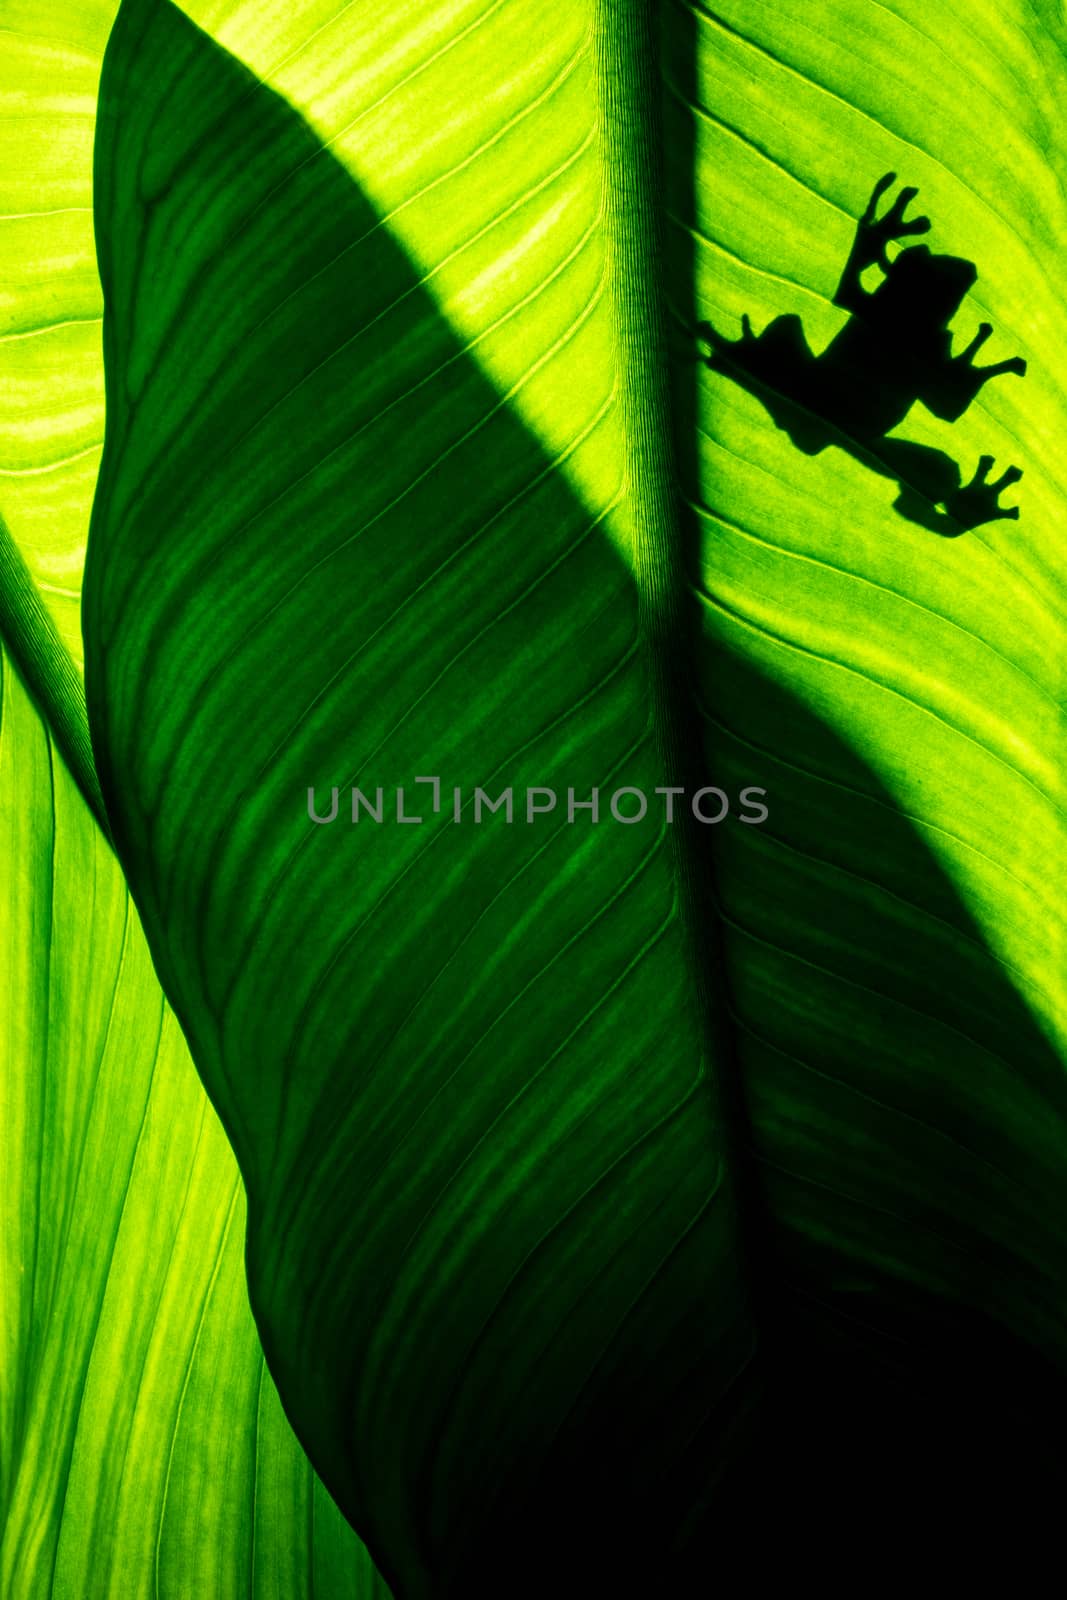 Frog shadow on natural green leaf background, tropical foliage texture by ronnarong